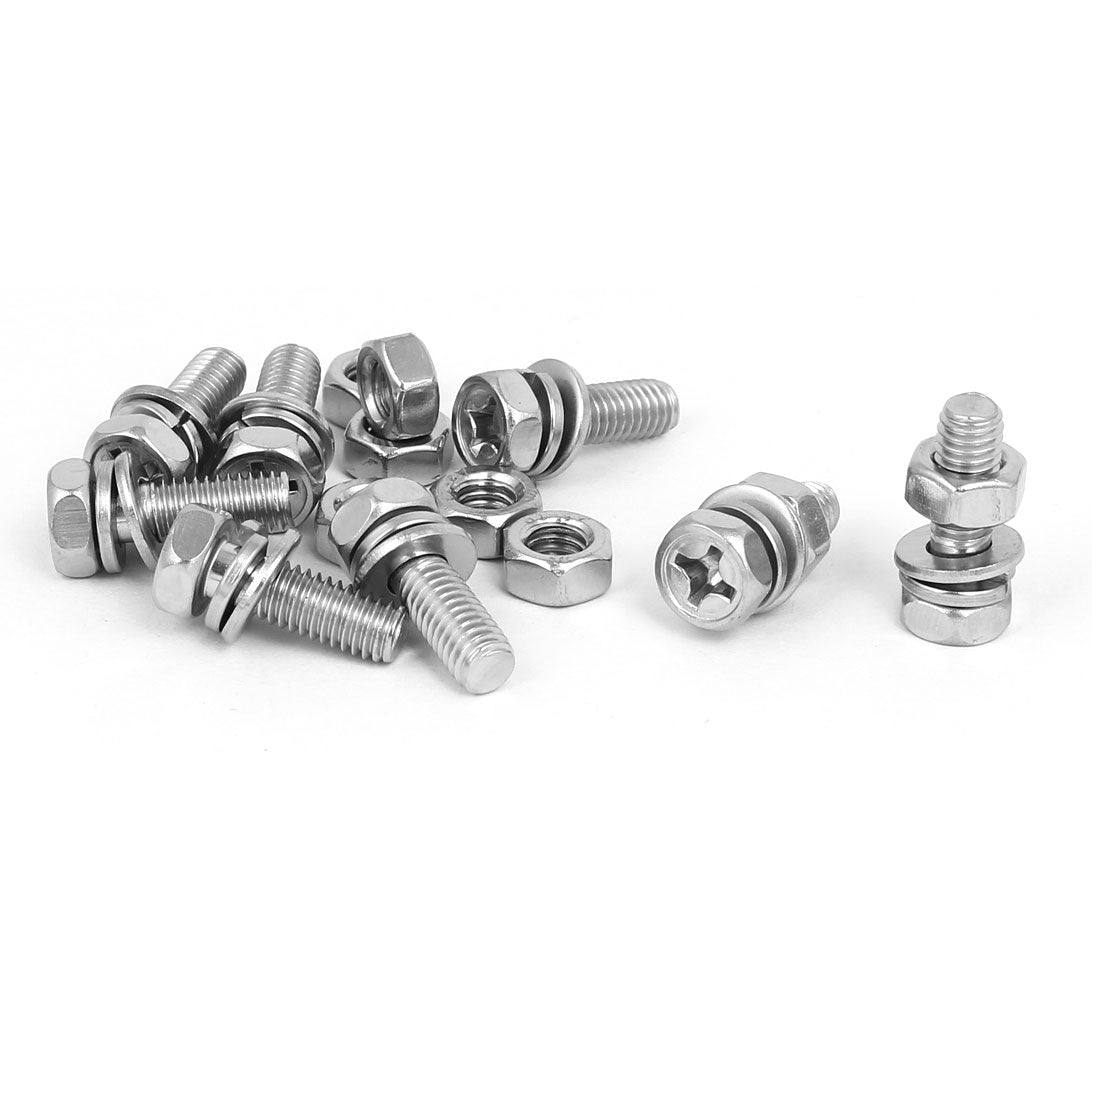 uxcell Uxcell M6 x 18mm 304 Stainless Steel Phillips Hex Head Bolts Nuts w Washers 8 Sets